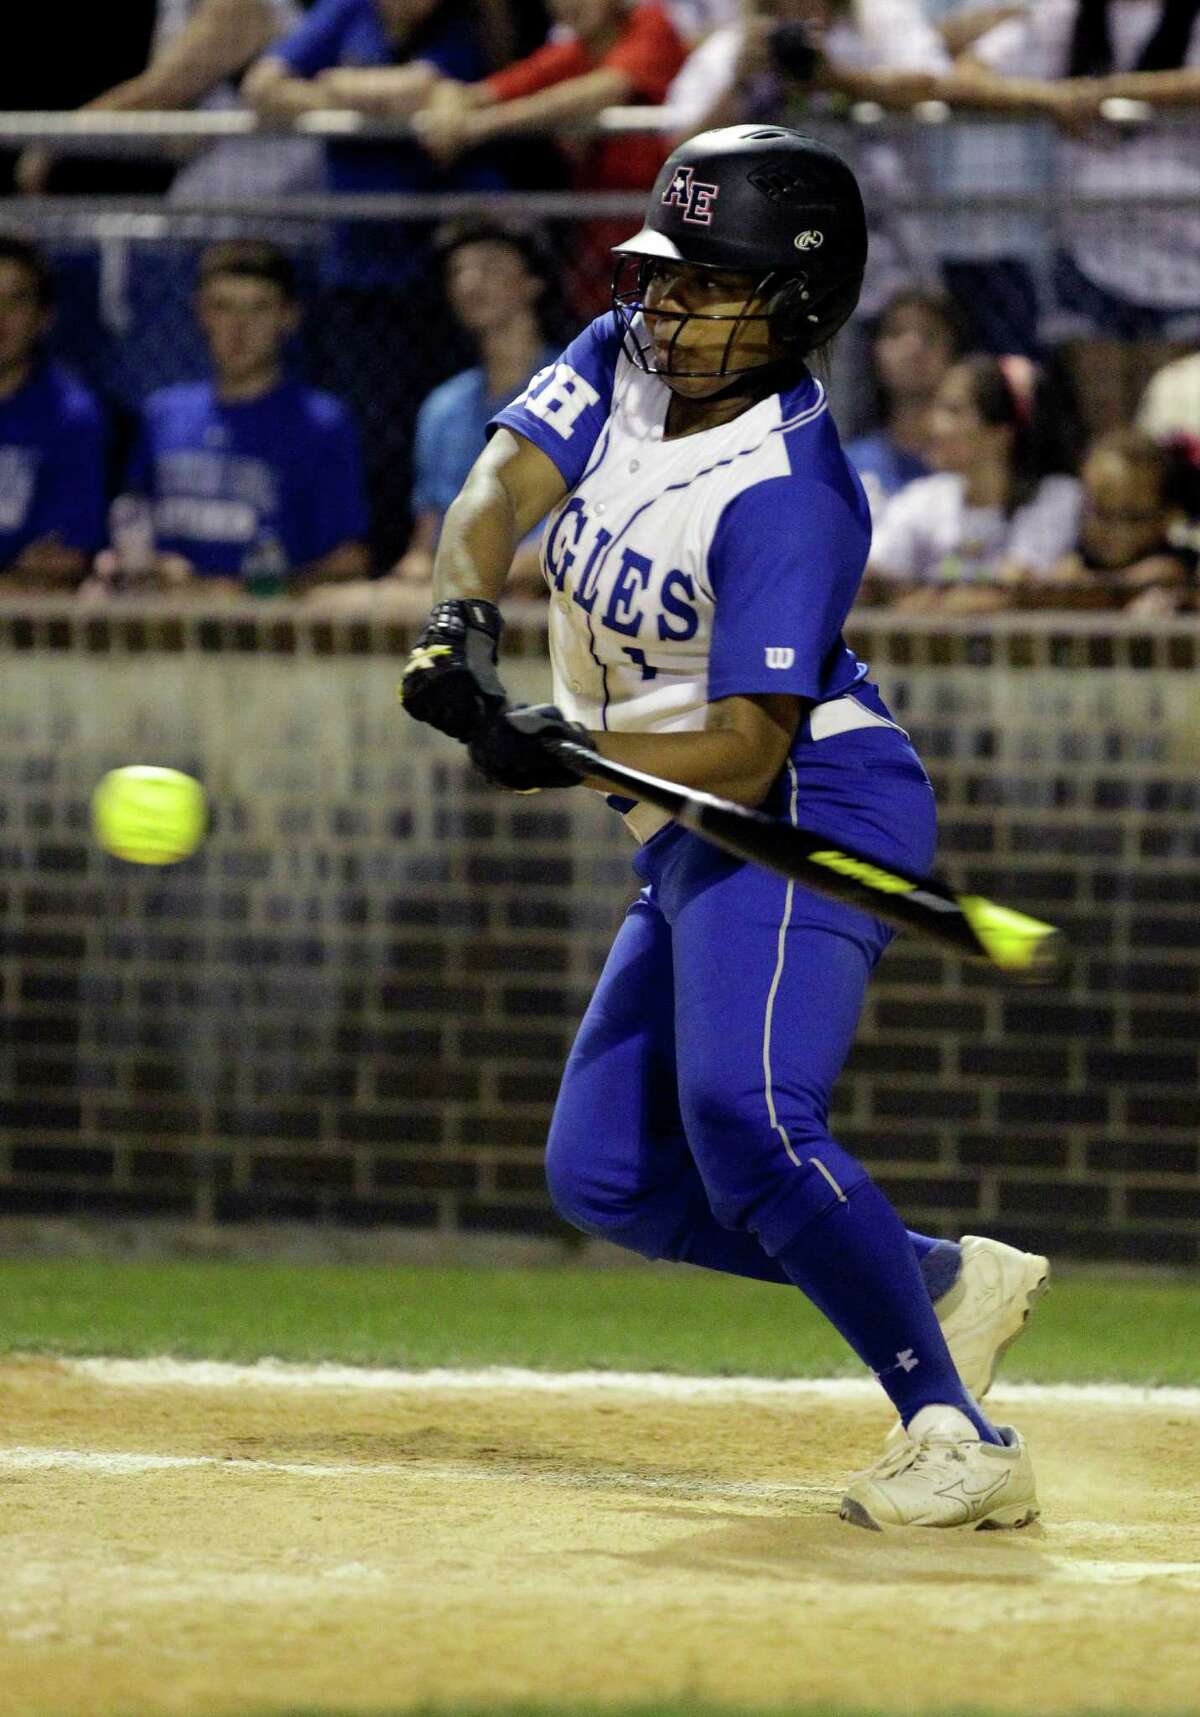 Barbers Hill's Jillian Guse makes contact with the ball during the sixth inning of the regional finals softball game against Pearland Dawson at Goose Creek Memorial High School on Thursday, May 22, 2014, in Baytown.